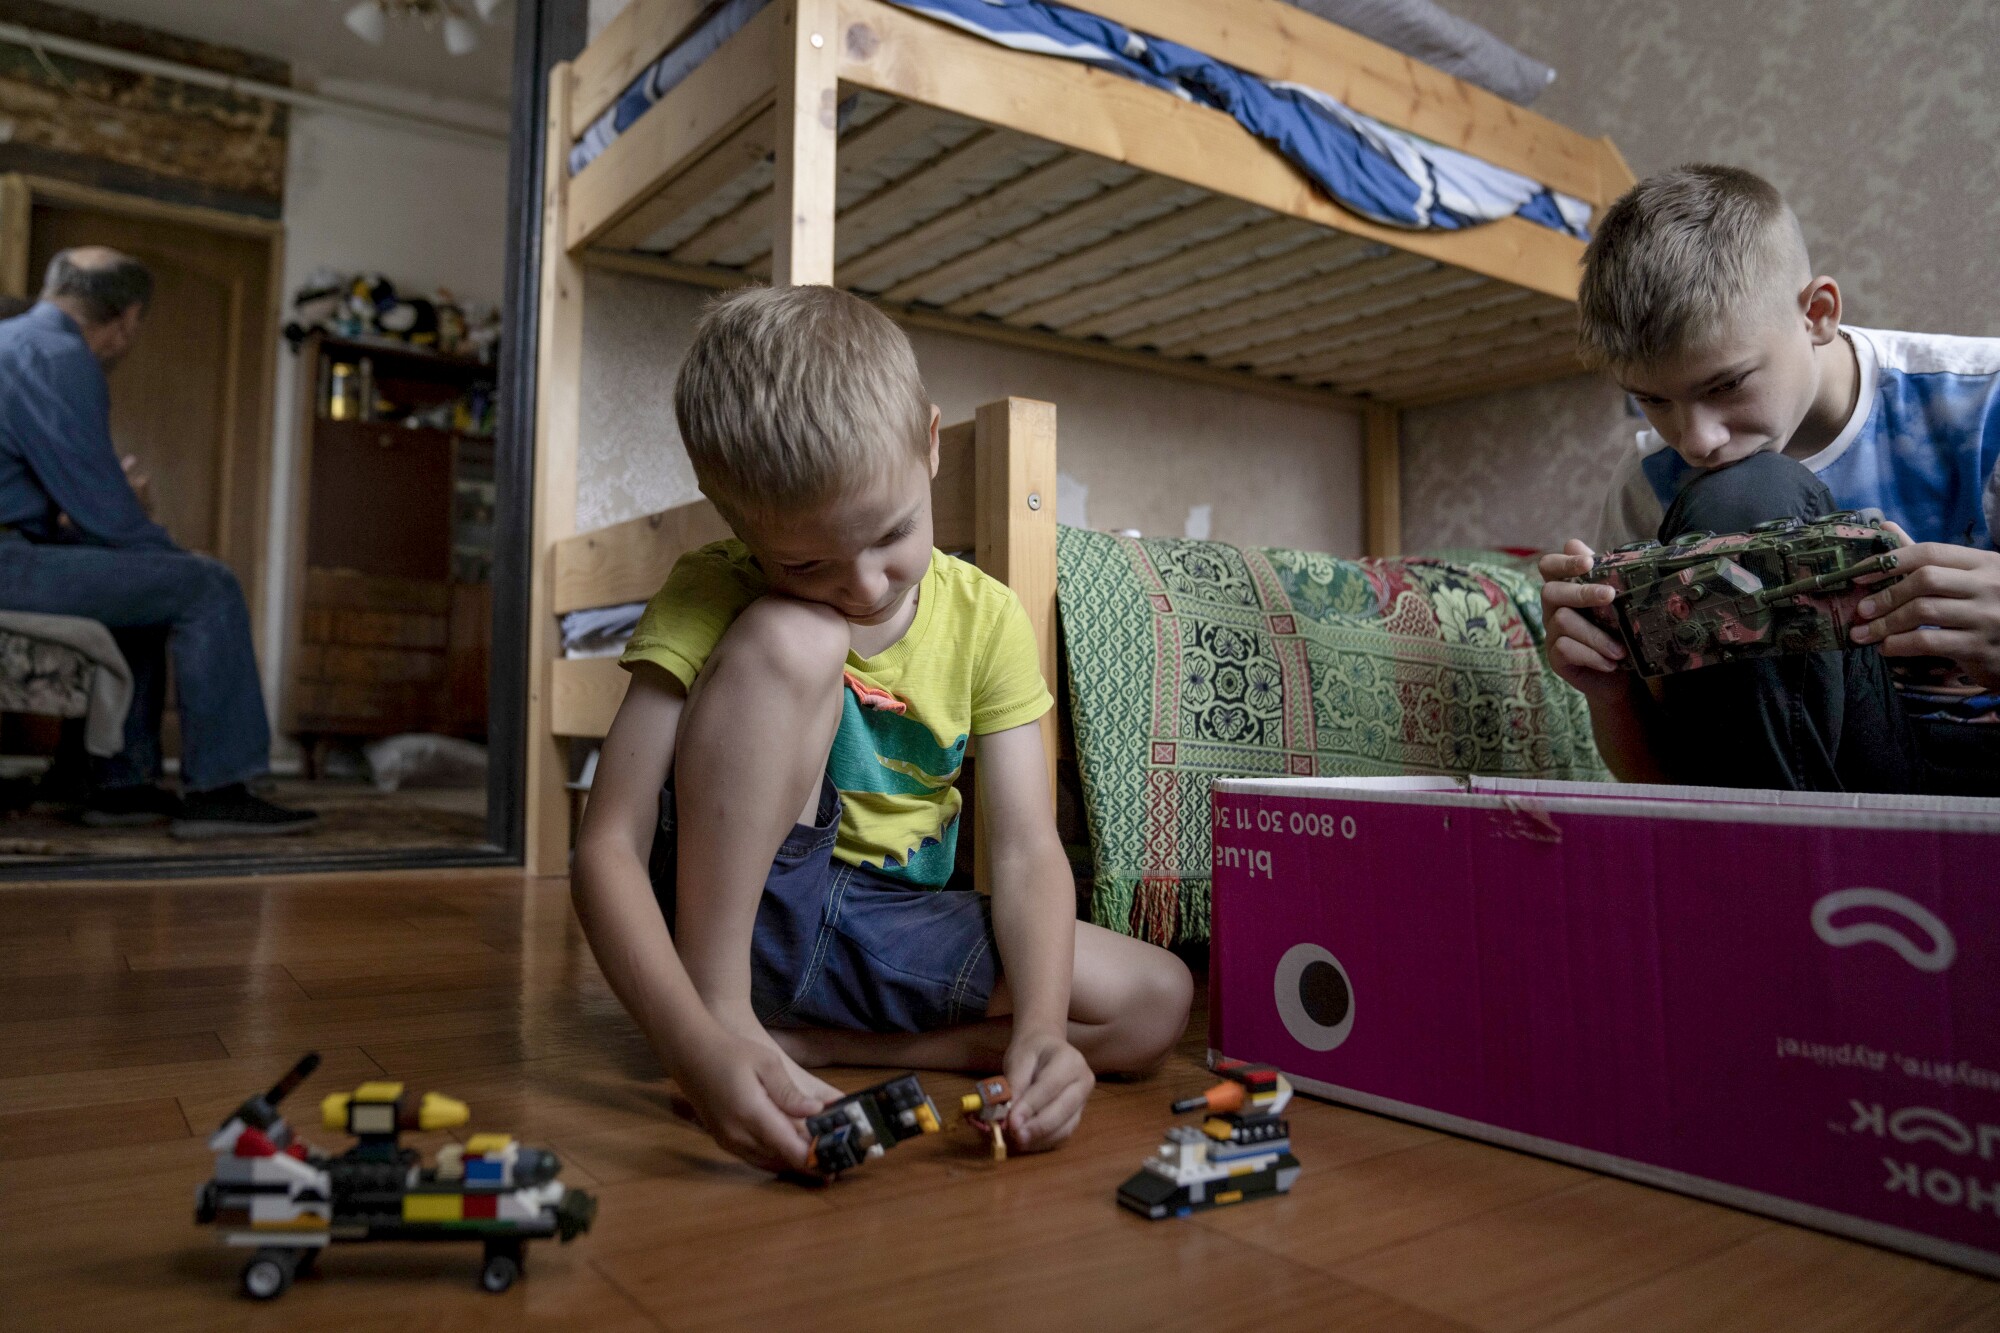 Two boys are playing with toys in the room.